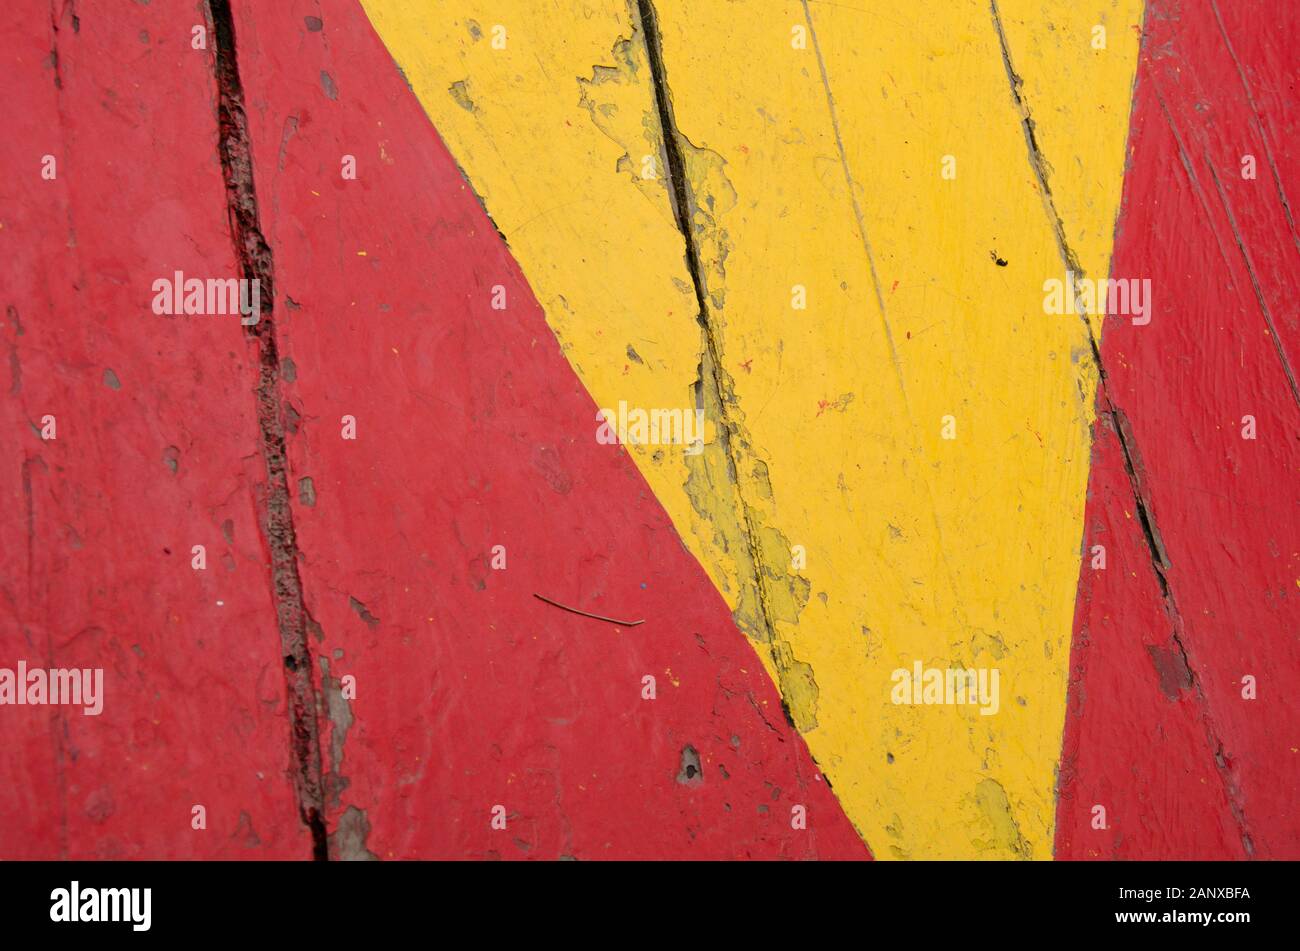 Design in red and yellow on wooden boards, detail of a Trajinera in Xochimilco, Mexico Stock Photo